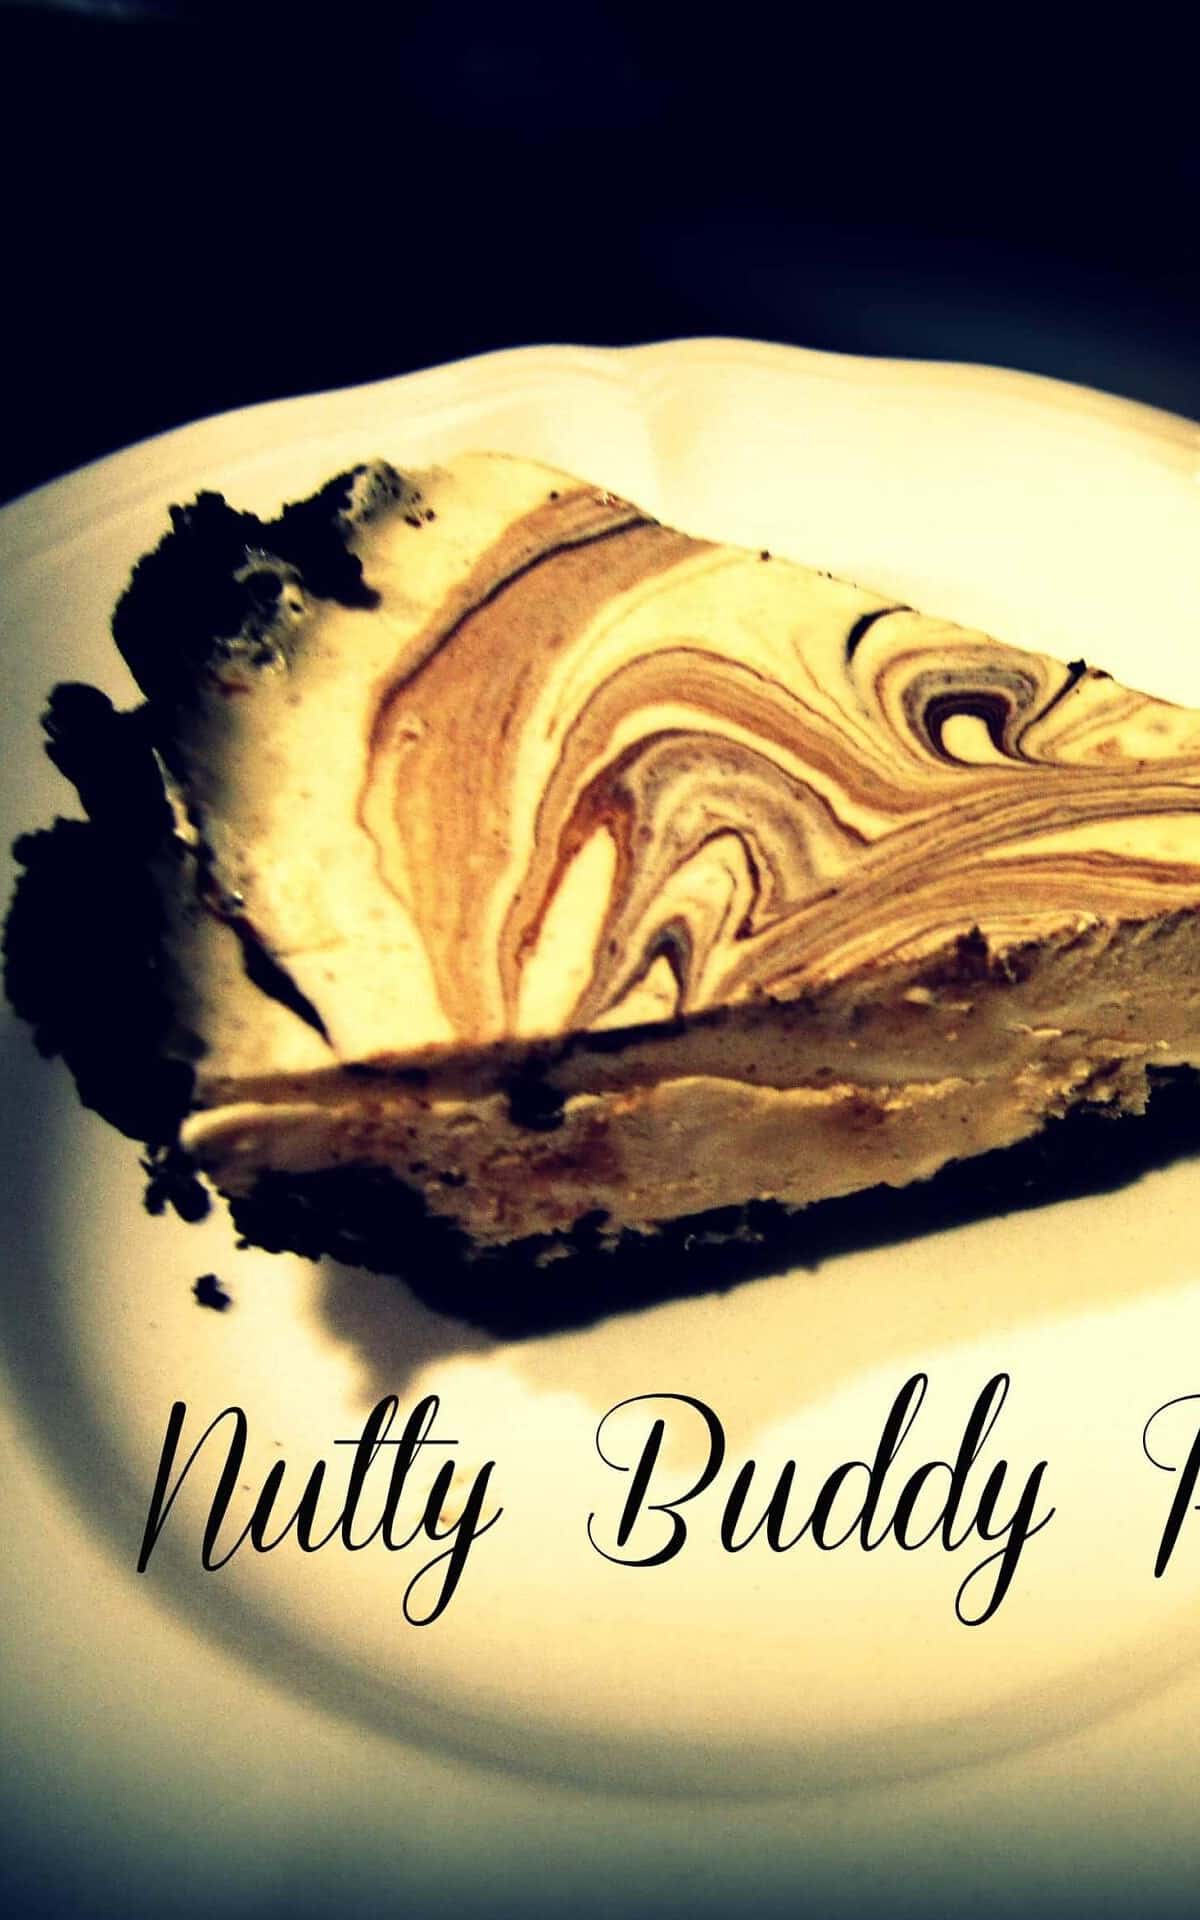  Bite into the crunchy goodness of these Nutty Buddy Pies!